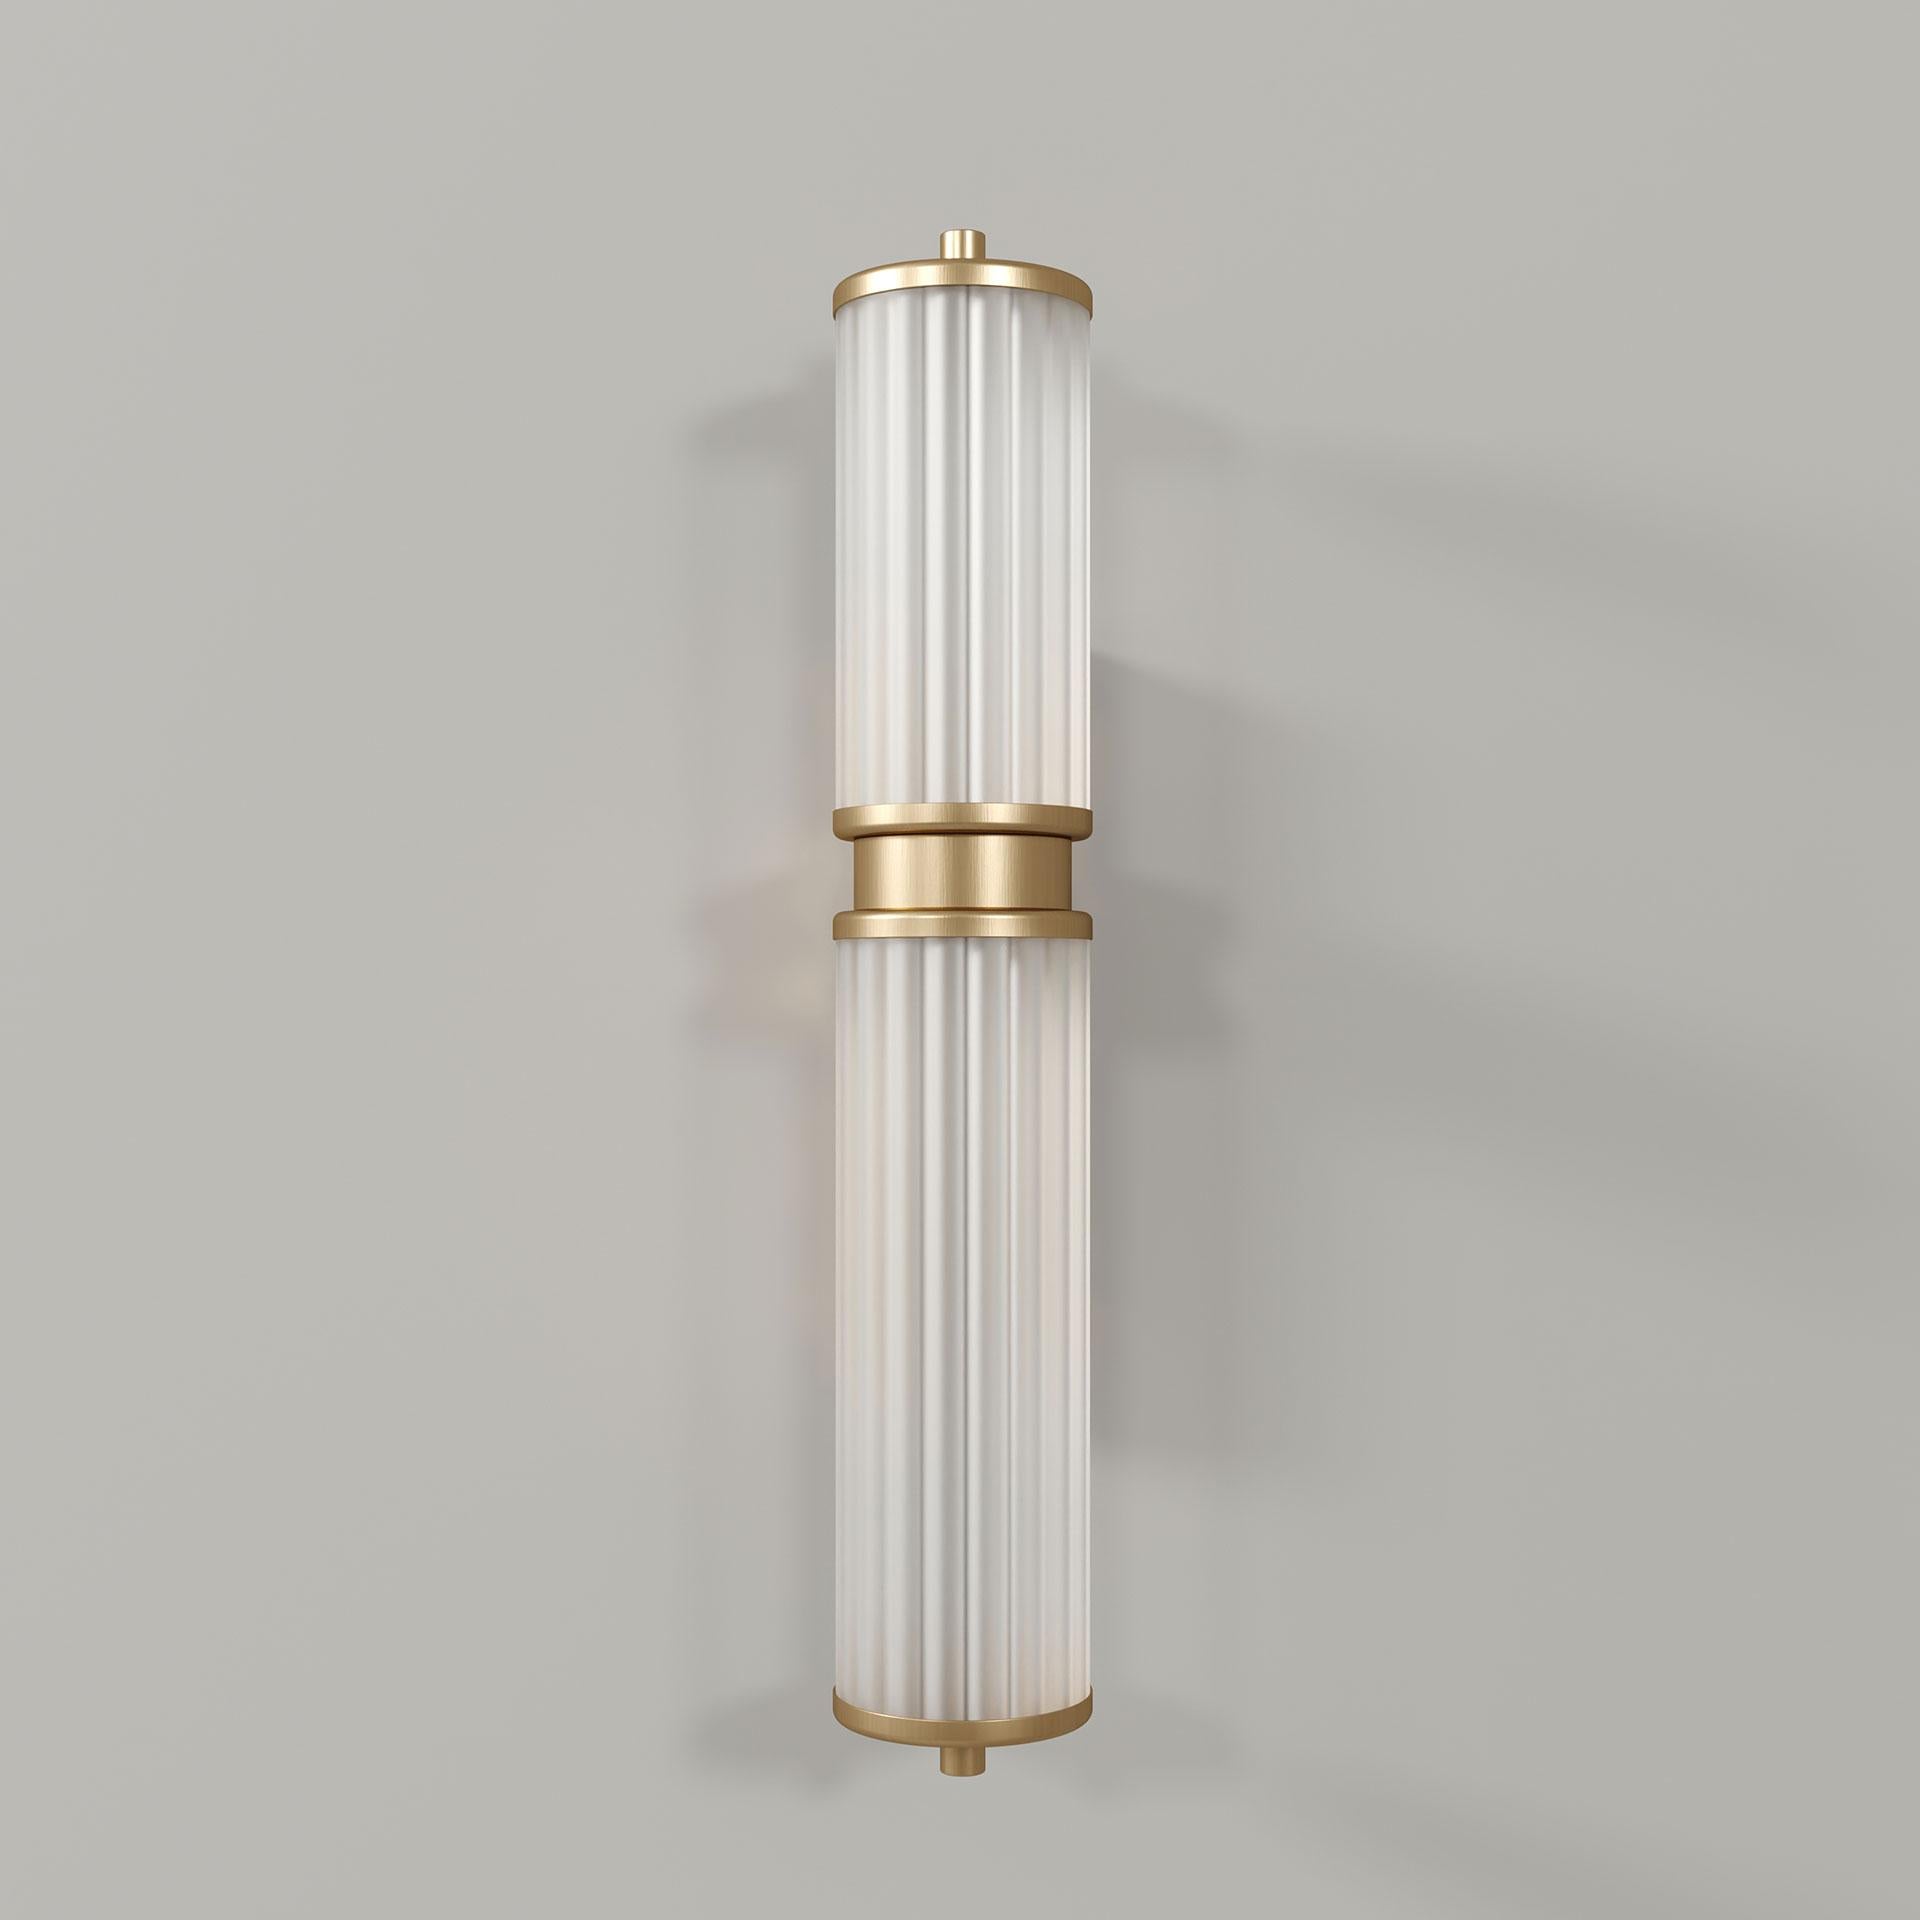 Portuguese 21st Century Miami Wall Lamp Brass Fluted Glass For Sale